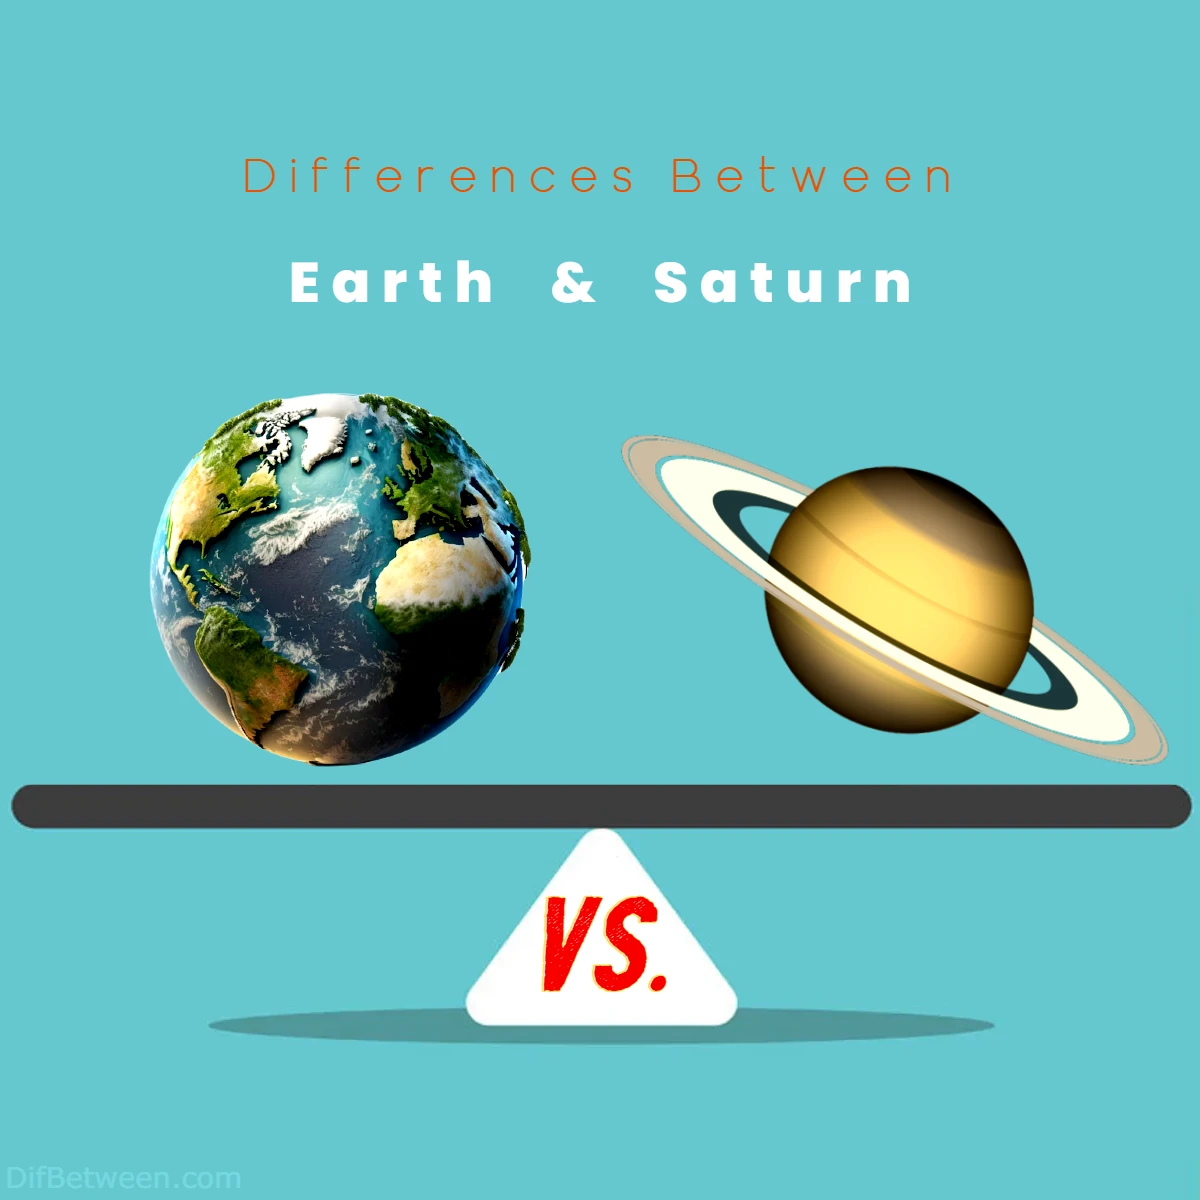 Differences Between Earth vs Saturn